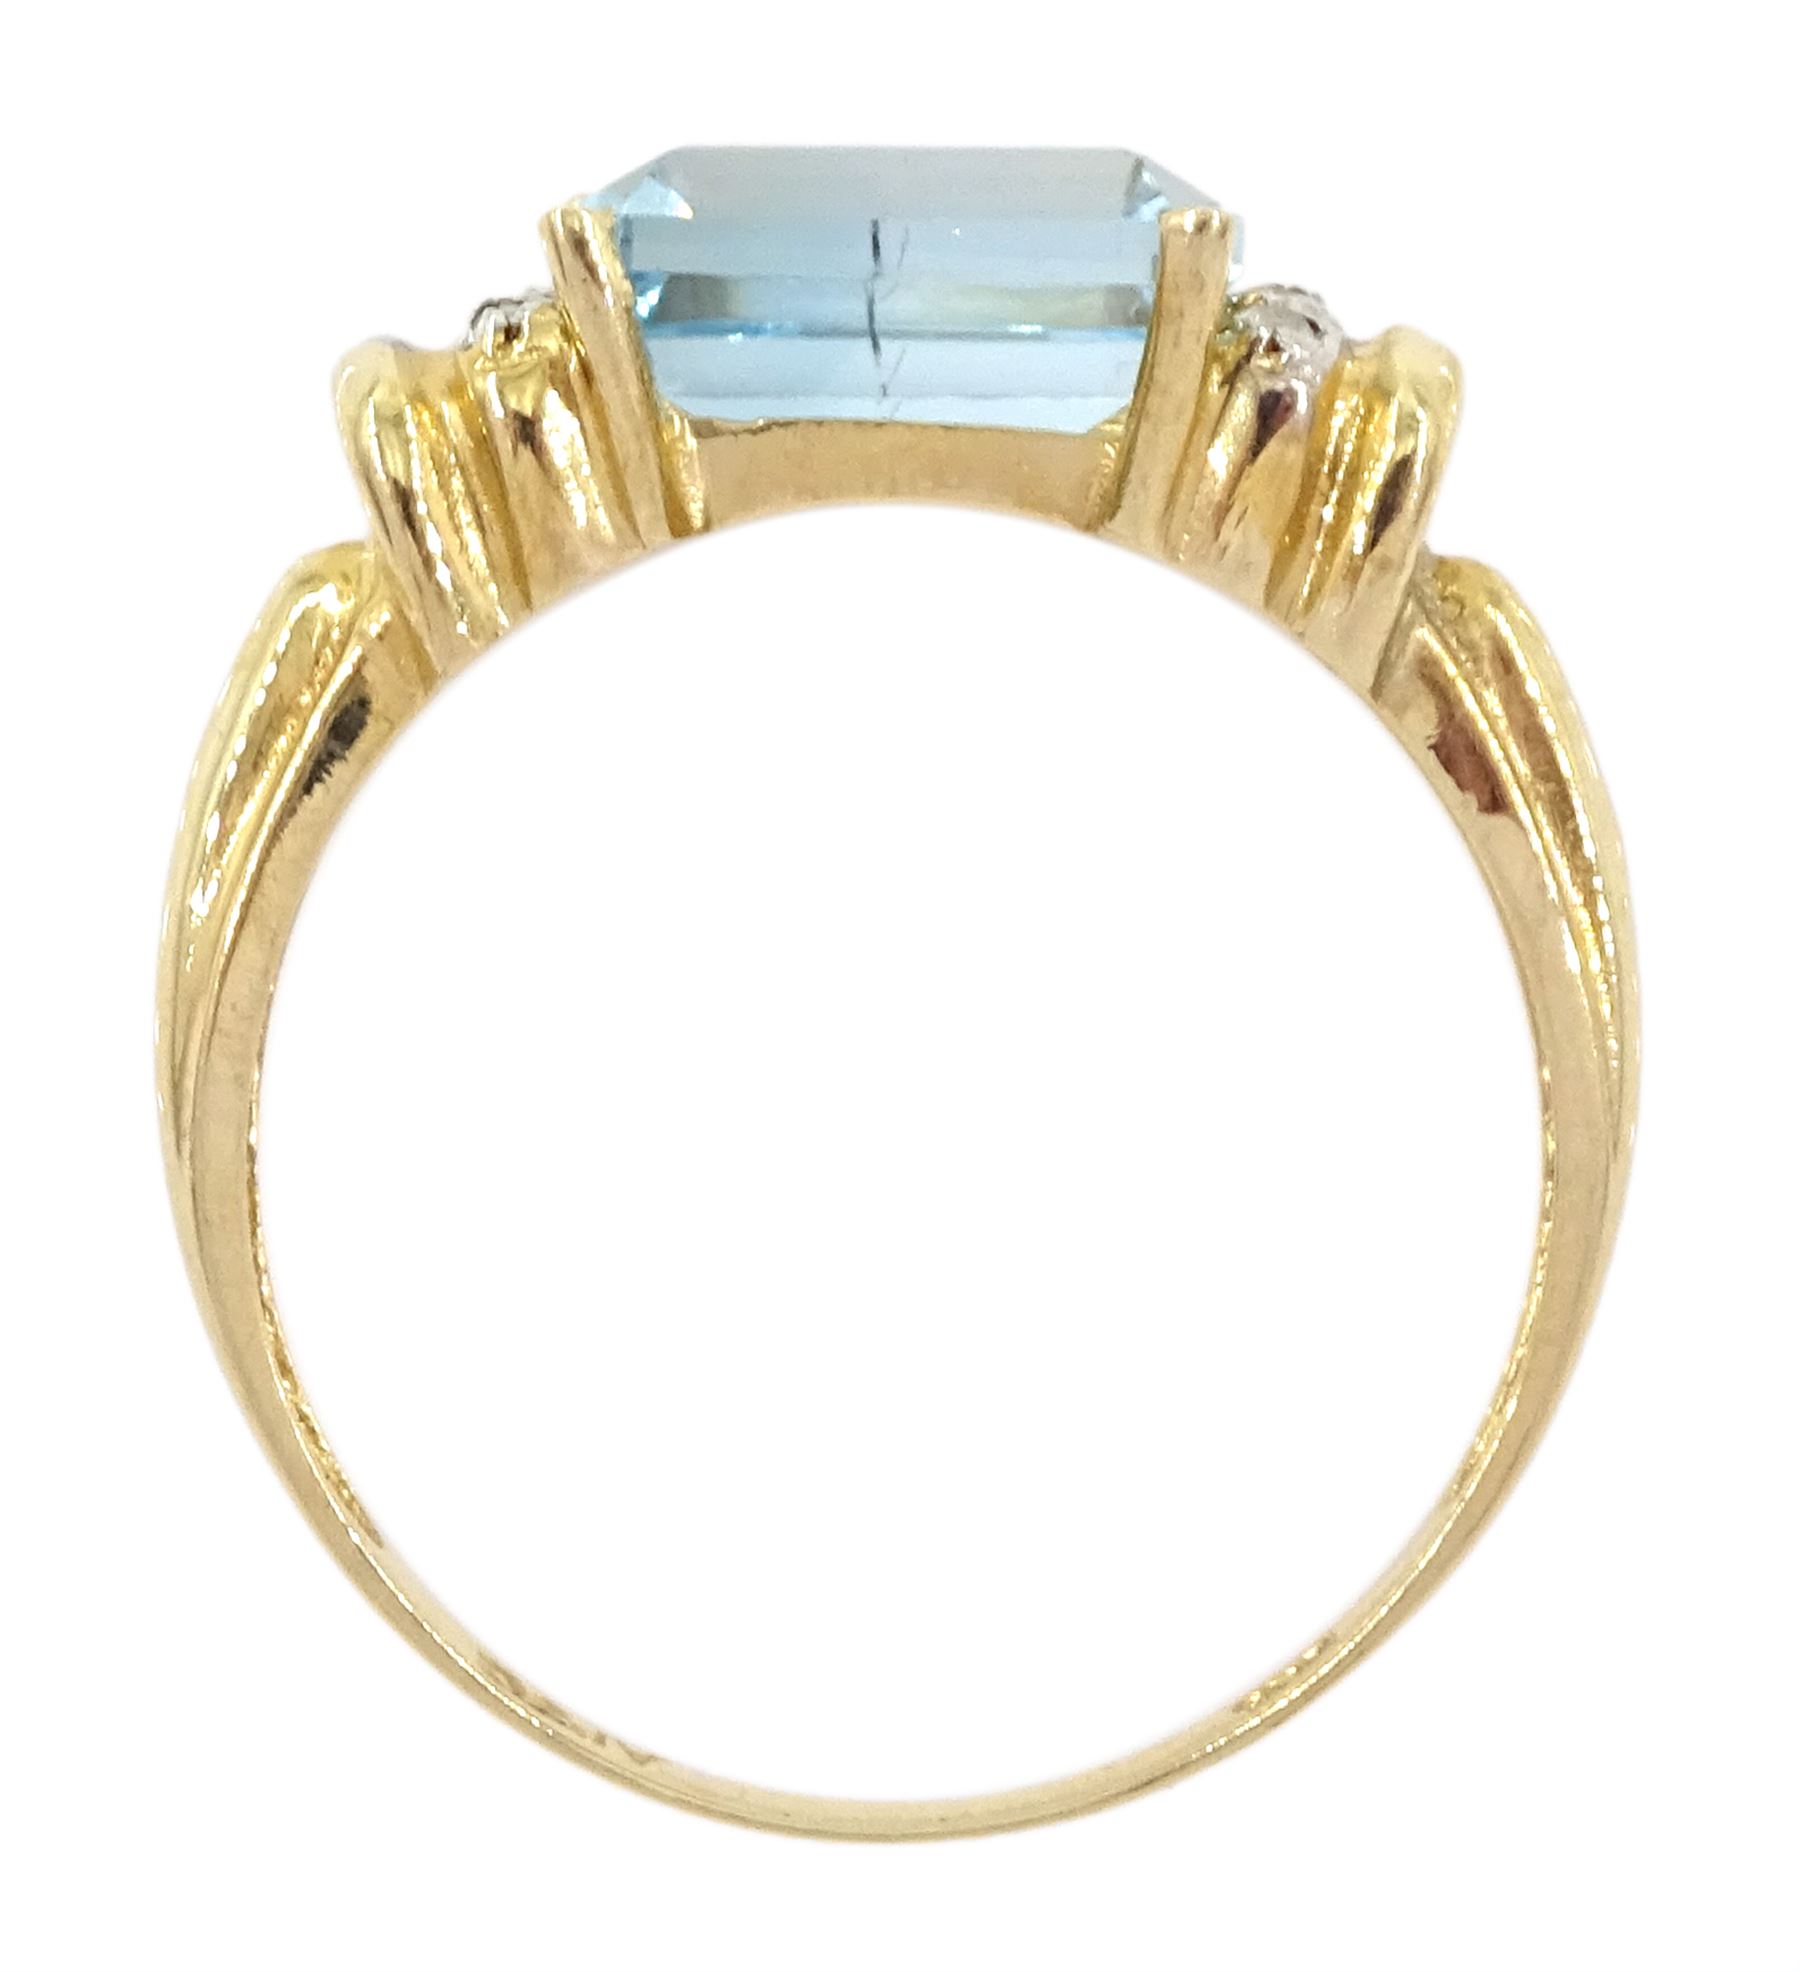 Gold emerald cut blue topaz and diamond ring - Image 4 of 4